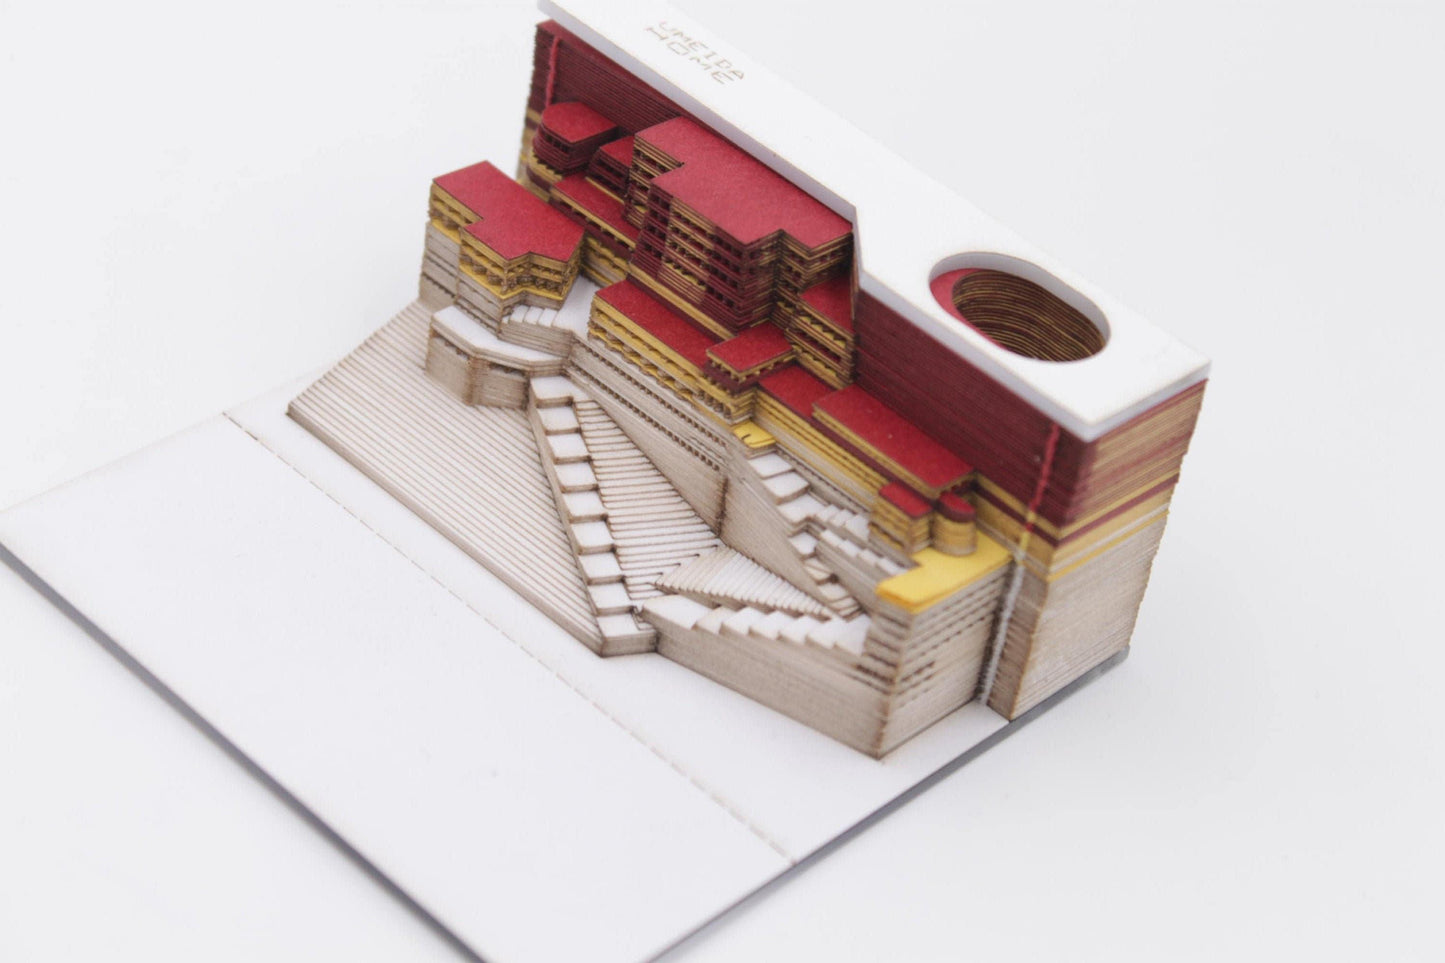 Spiral Staircase Model Building 3D Note Pad - Creative Memo Pad - Omoshiroi Block - DIY Paper Art Craft - Pen Holder - Stationery Toys Gifts